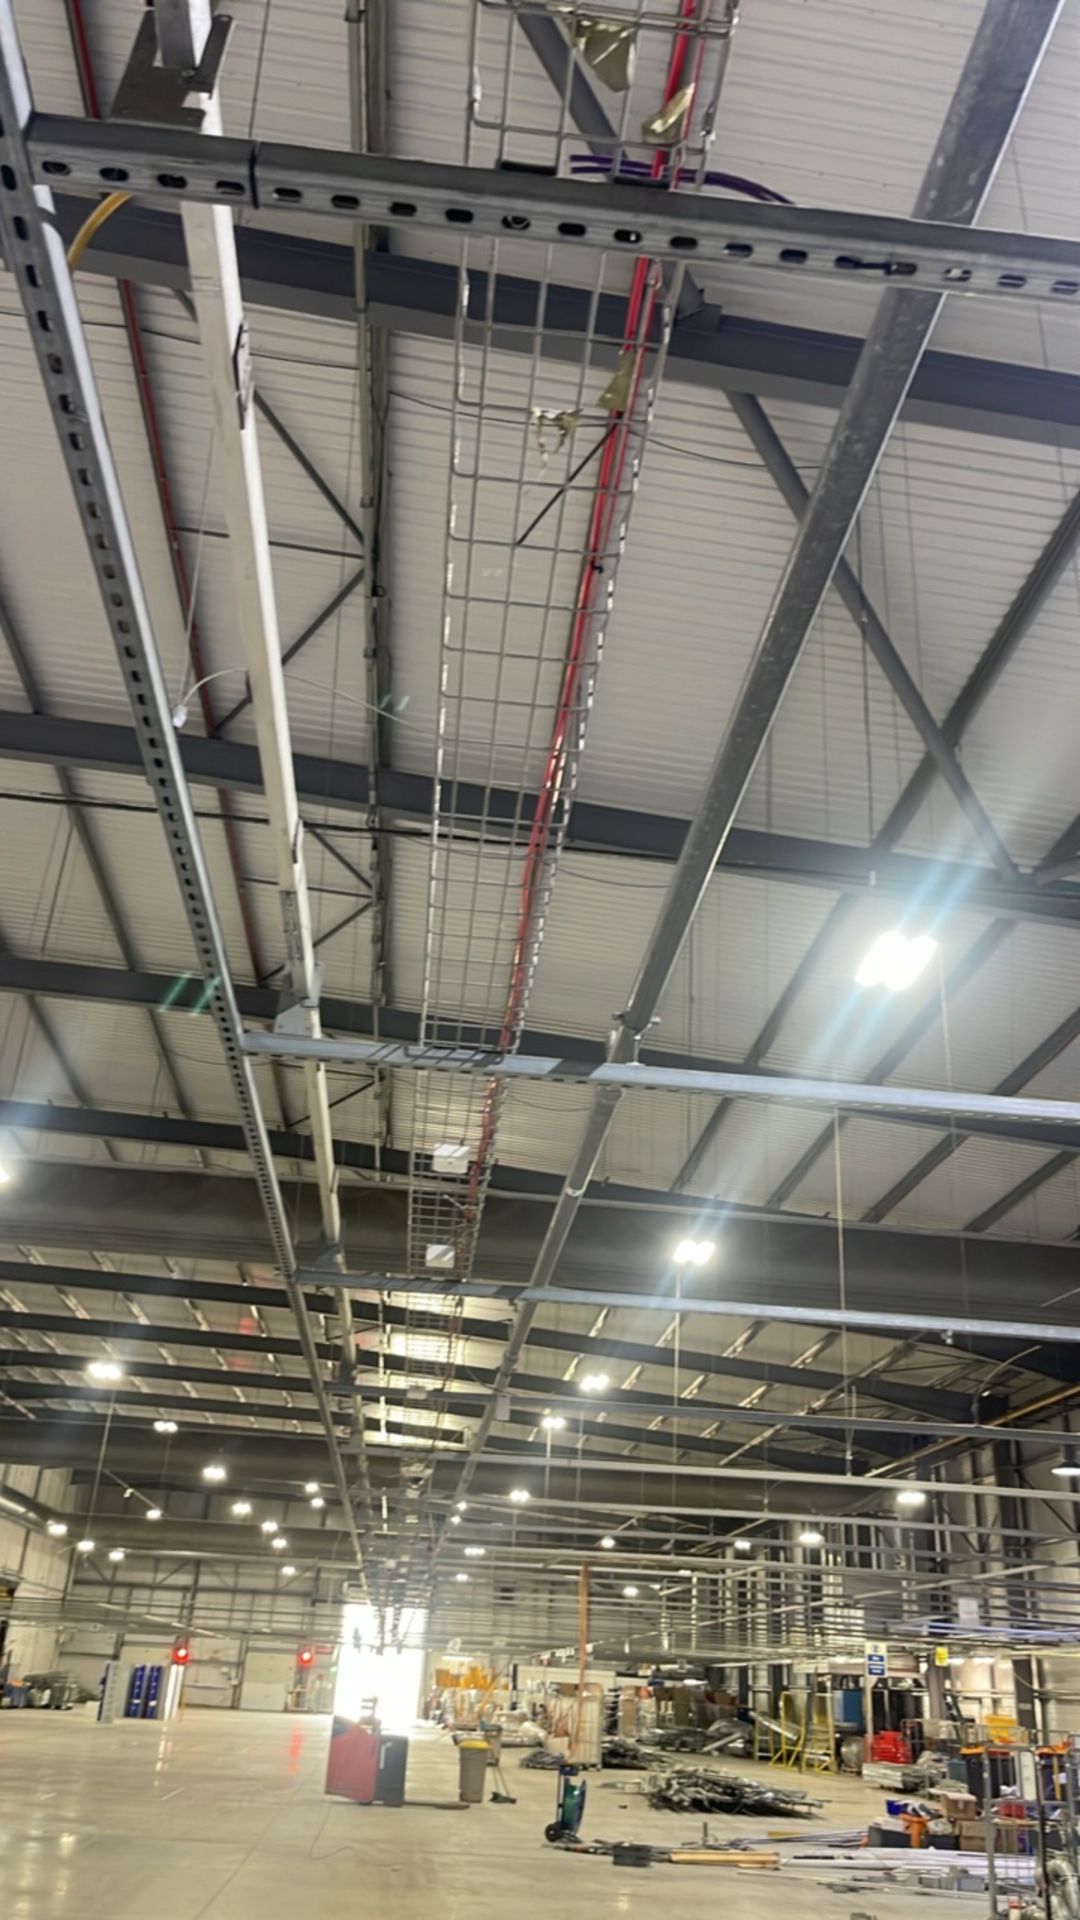 Entire Warehouse Ceiling Of Unistrut 41mm Slotted Channel Pieces - Image 9 of 10